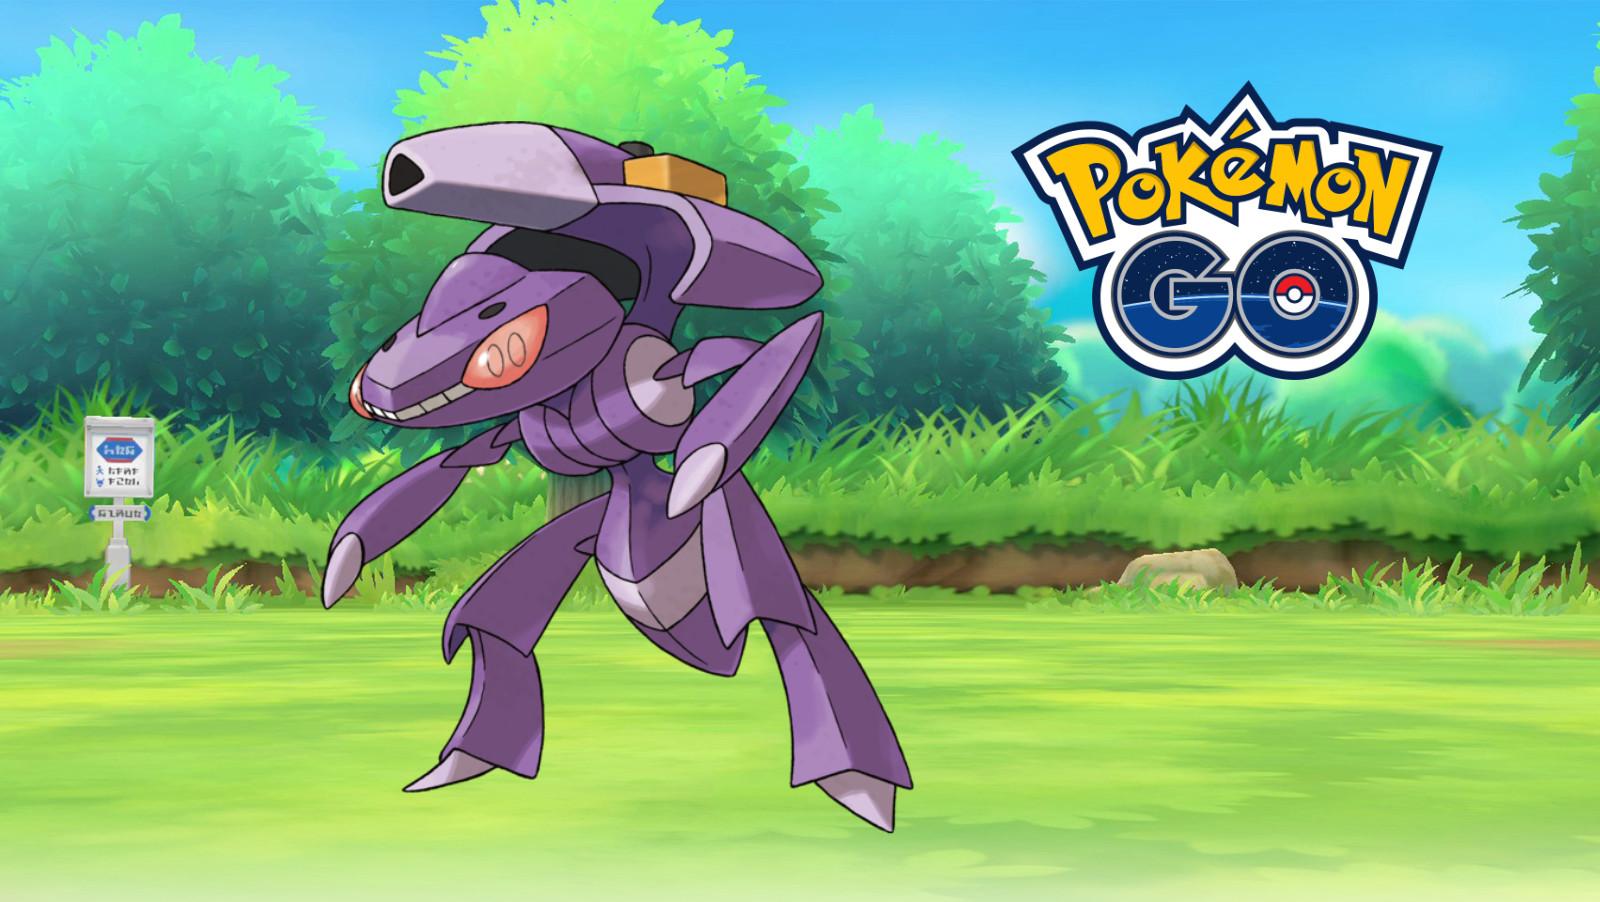 Pokemon Go: Mythical Pokemon Genesect Now Live As A Paid Event